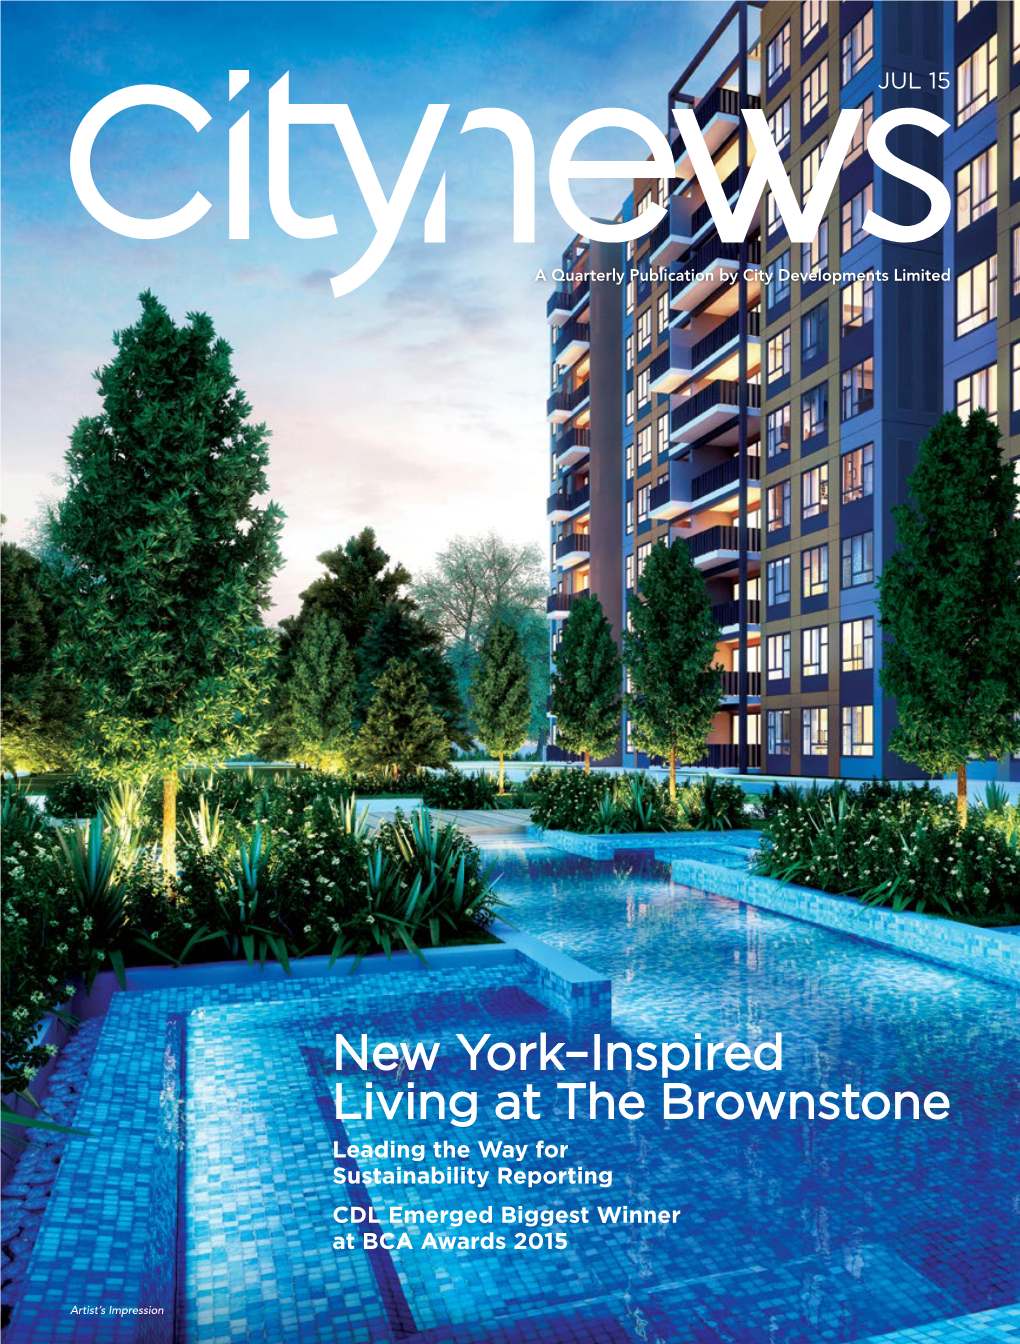 New York–Inspired Living at the Brownstone Leading the Way for Sustainability Reporting CDL Emerged Biggest Winner at BCA Awards 2015